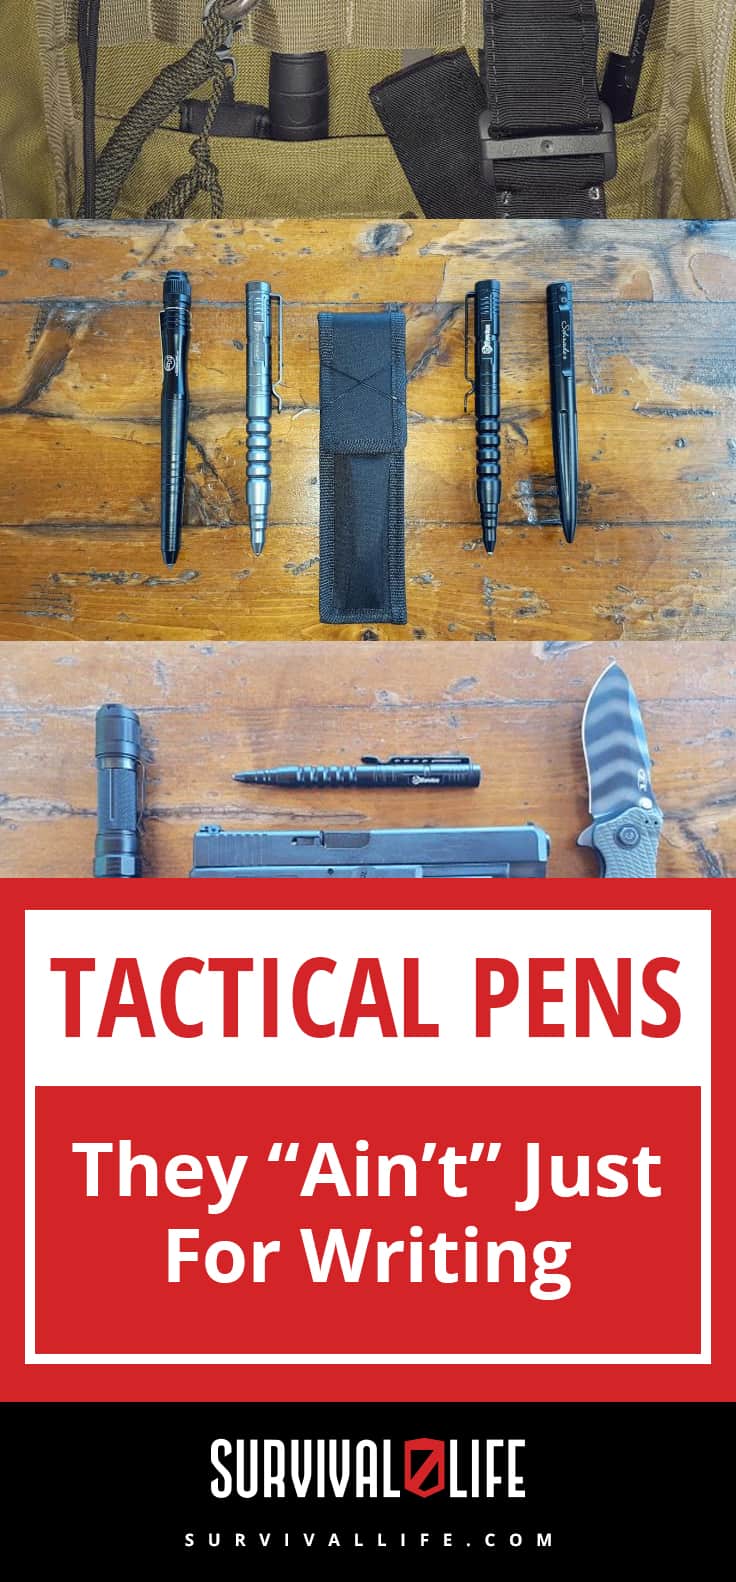 Tactical Pens: They “Ain't” Just For Writing | https://survivallife.com/tactical-pens/